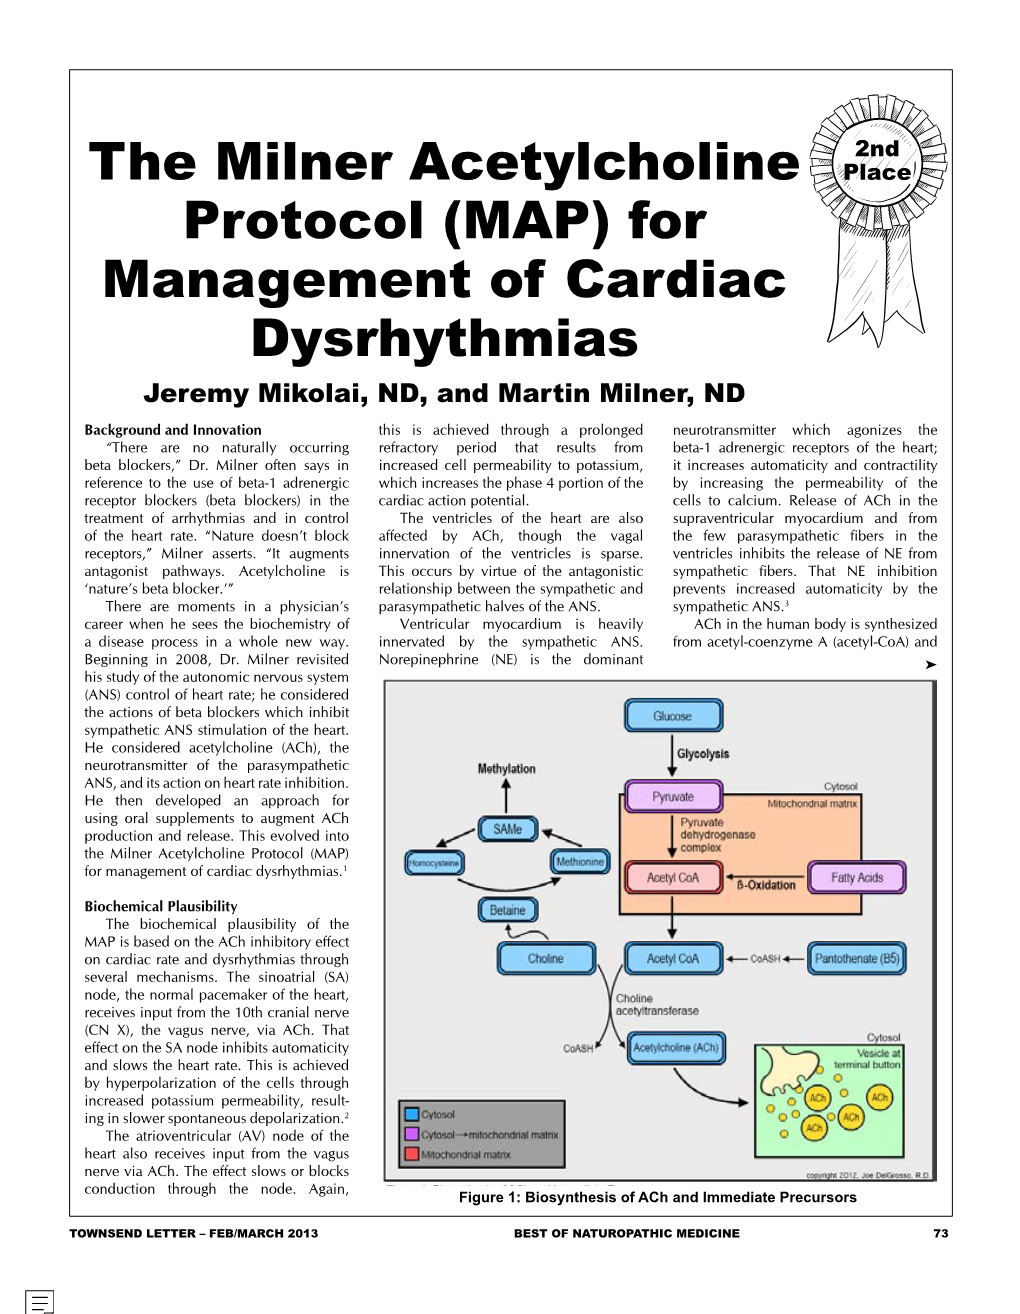 The Milner Acetylcholine Protocol (MAP) for Management of Cardiac Dysrhythmias.1